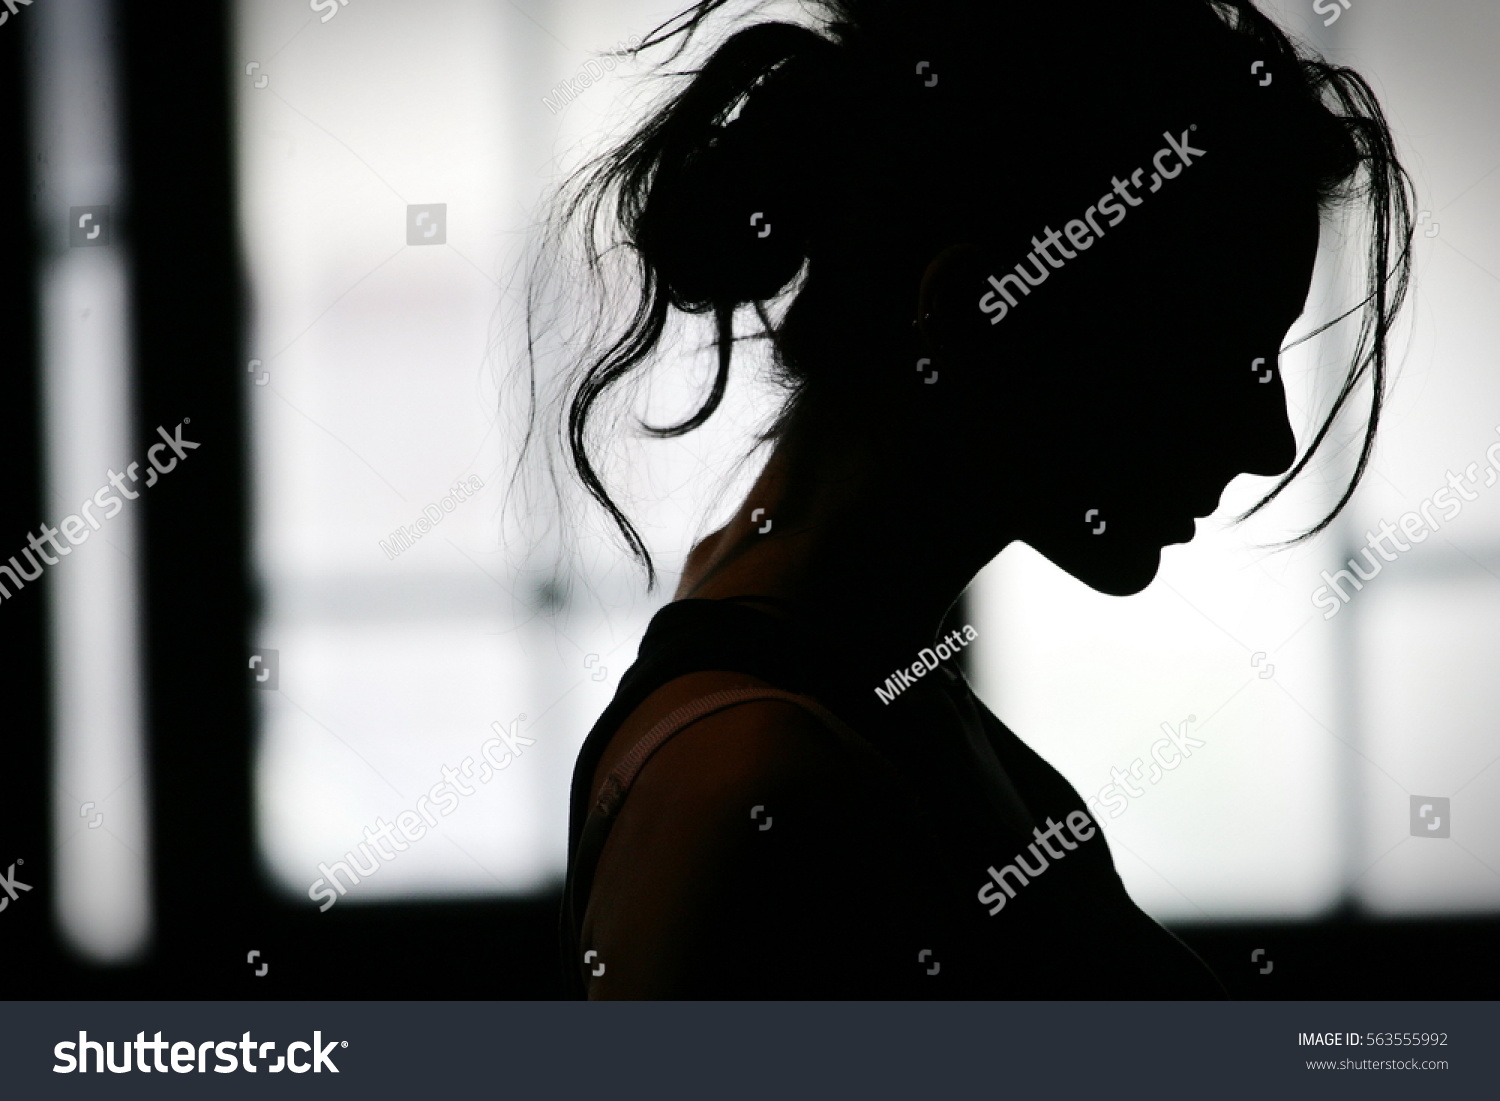 stock-photo-silhouette-of-woman-s-head-with-waving-hair-back-light-563555992.jpg